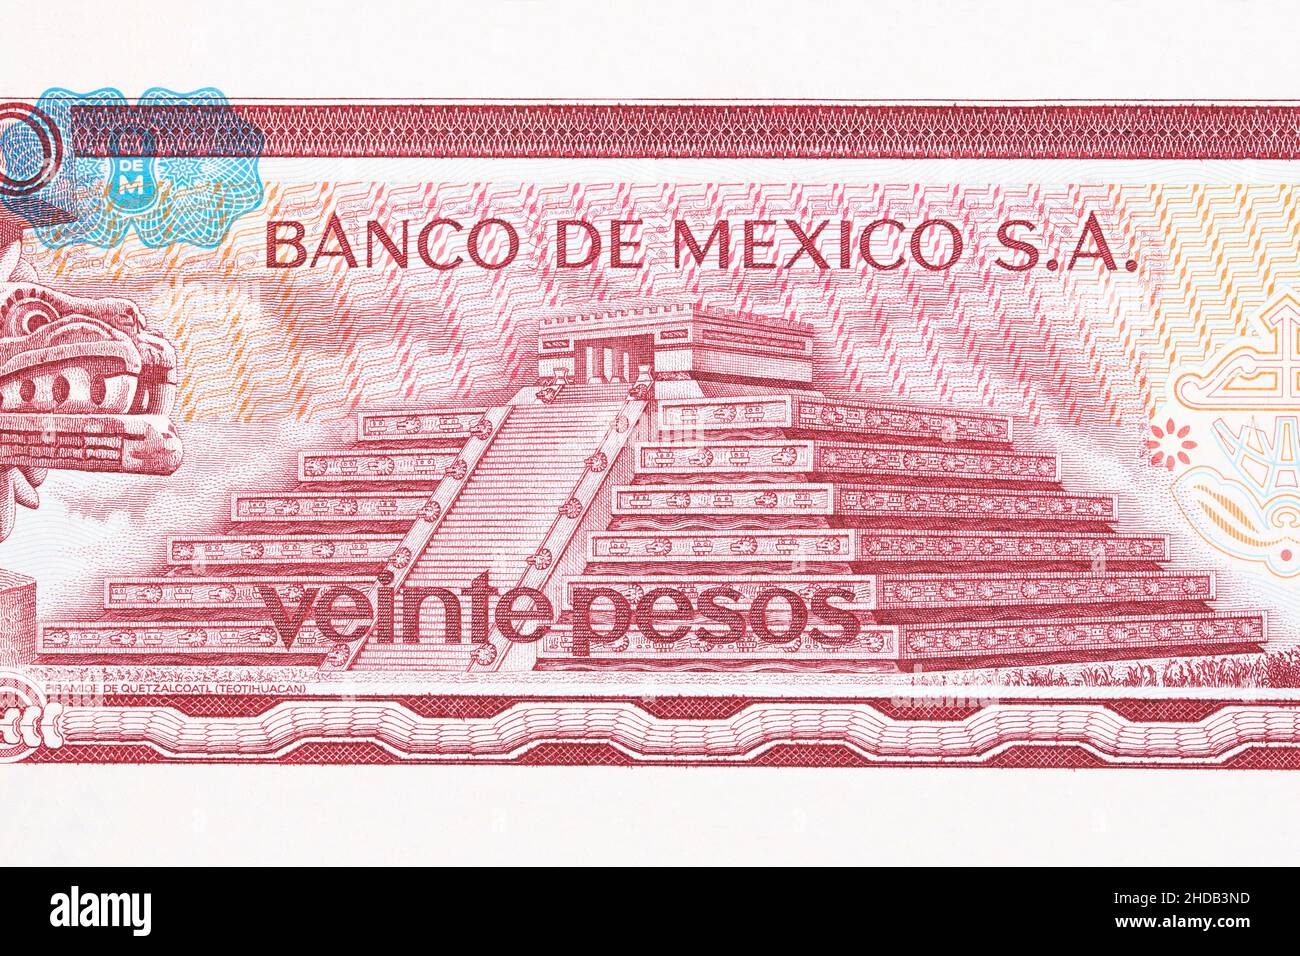 Pyramid of the god Quetzalcoatl from old Mexican money - Pesos Stock Photo